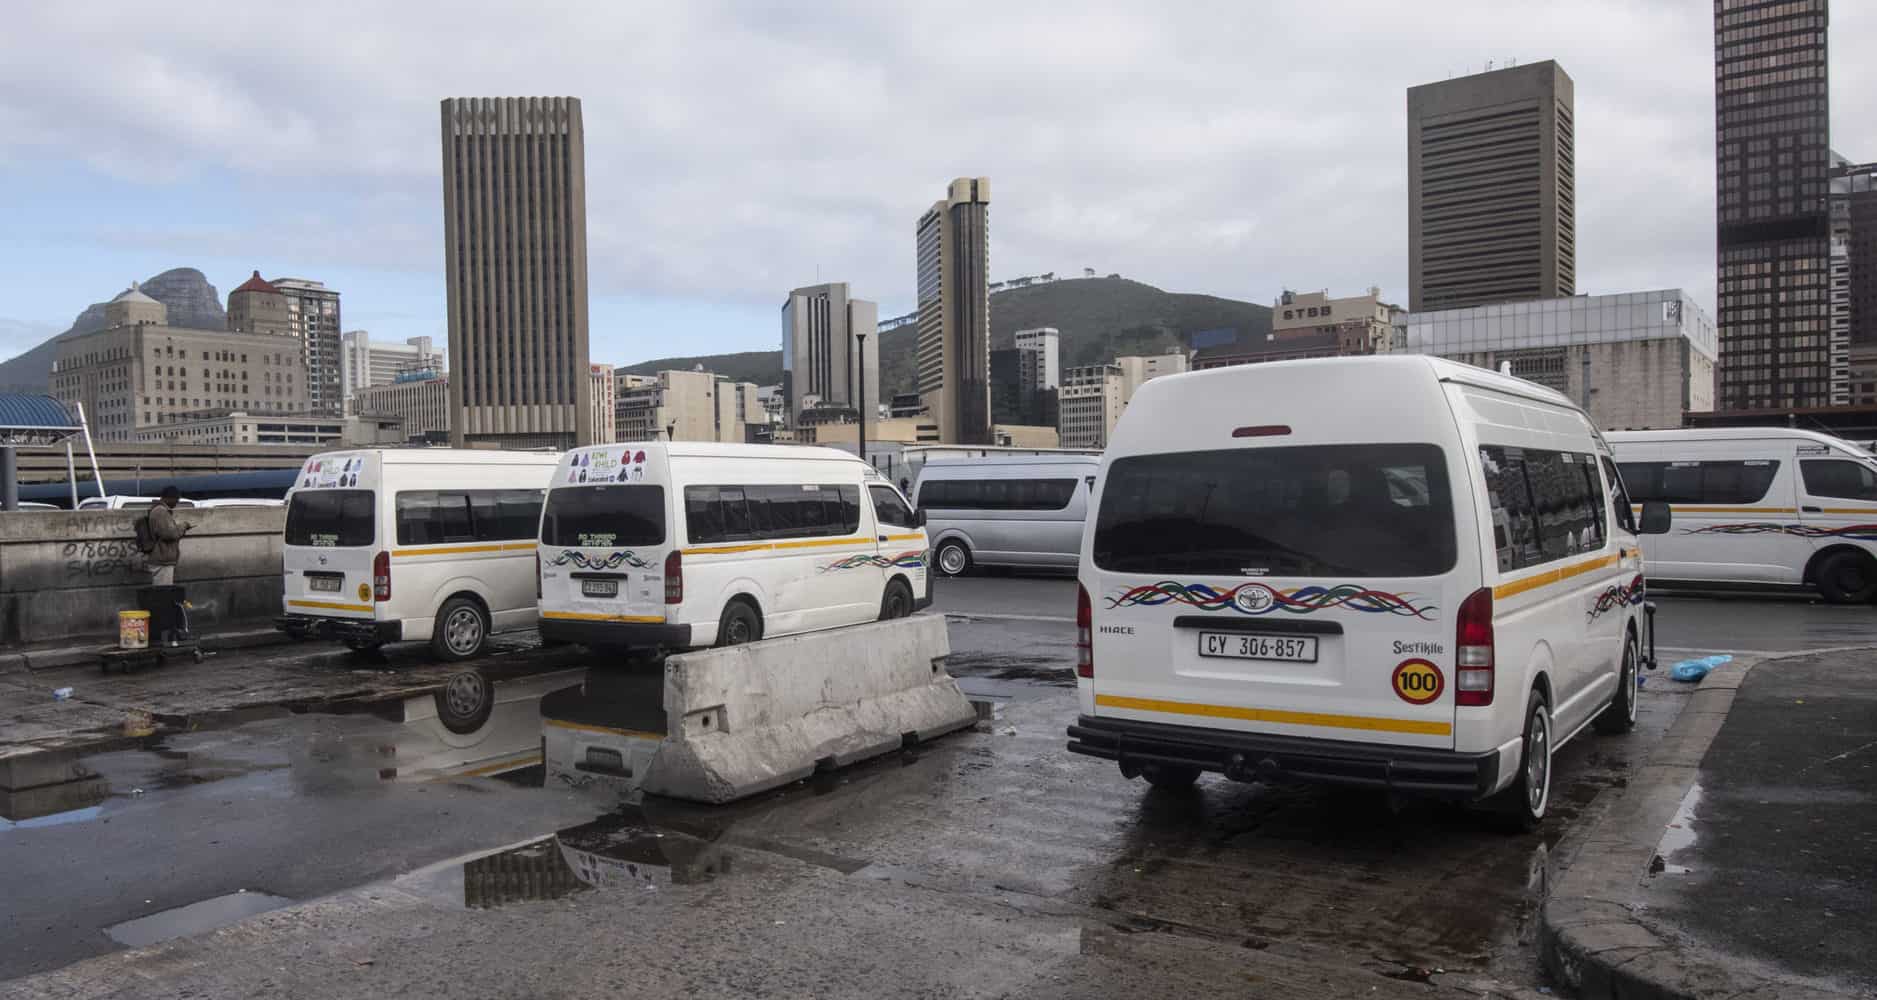 Western Cape authorities still working to find an amicable solution to reopen the B97 taxi route